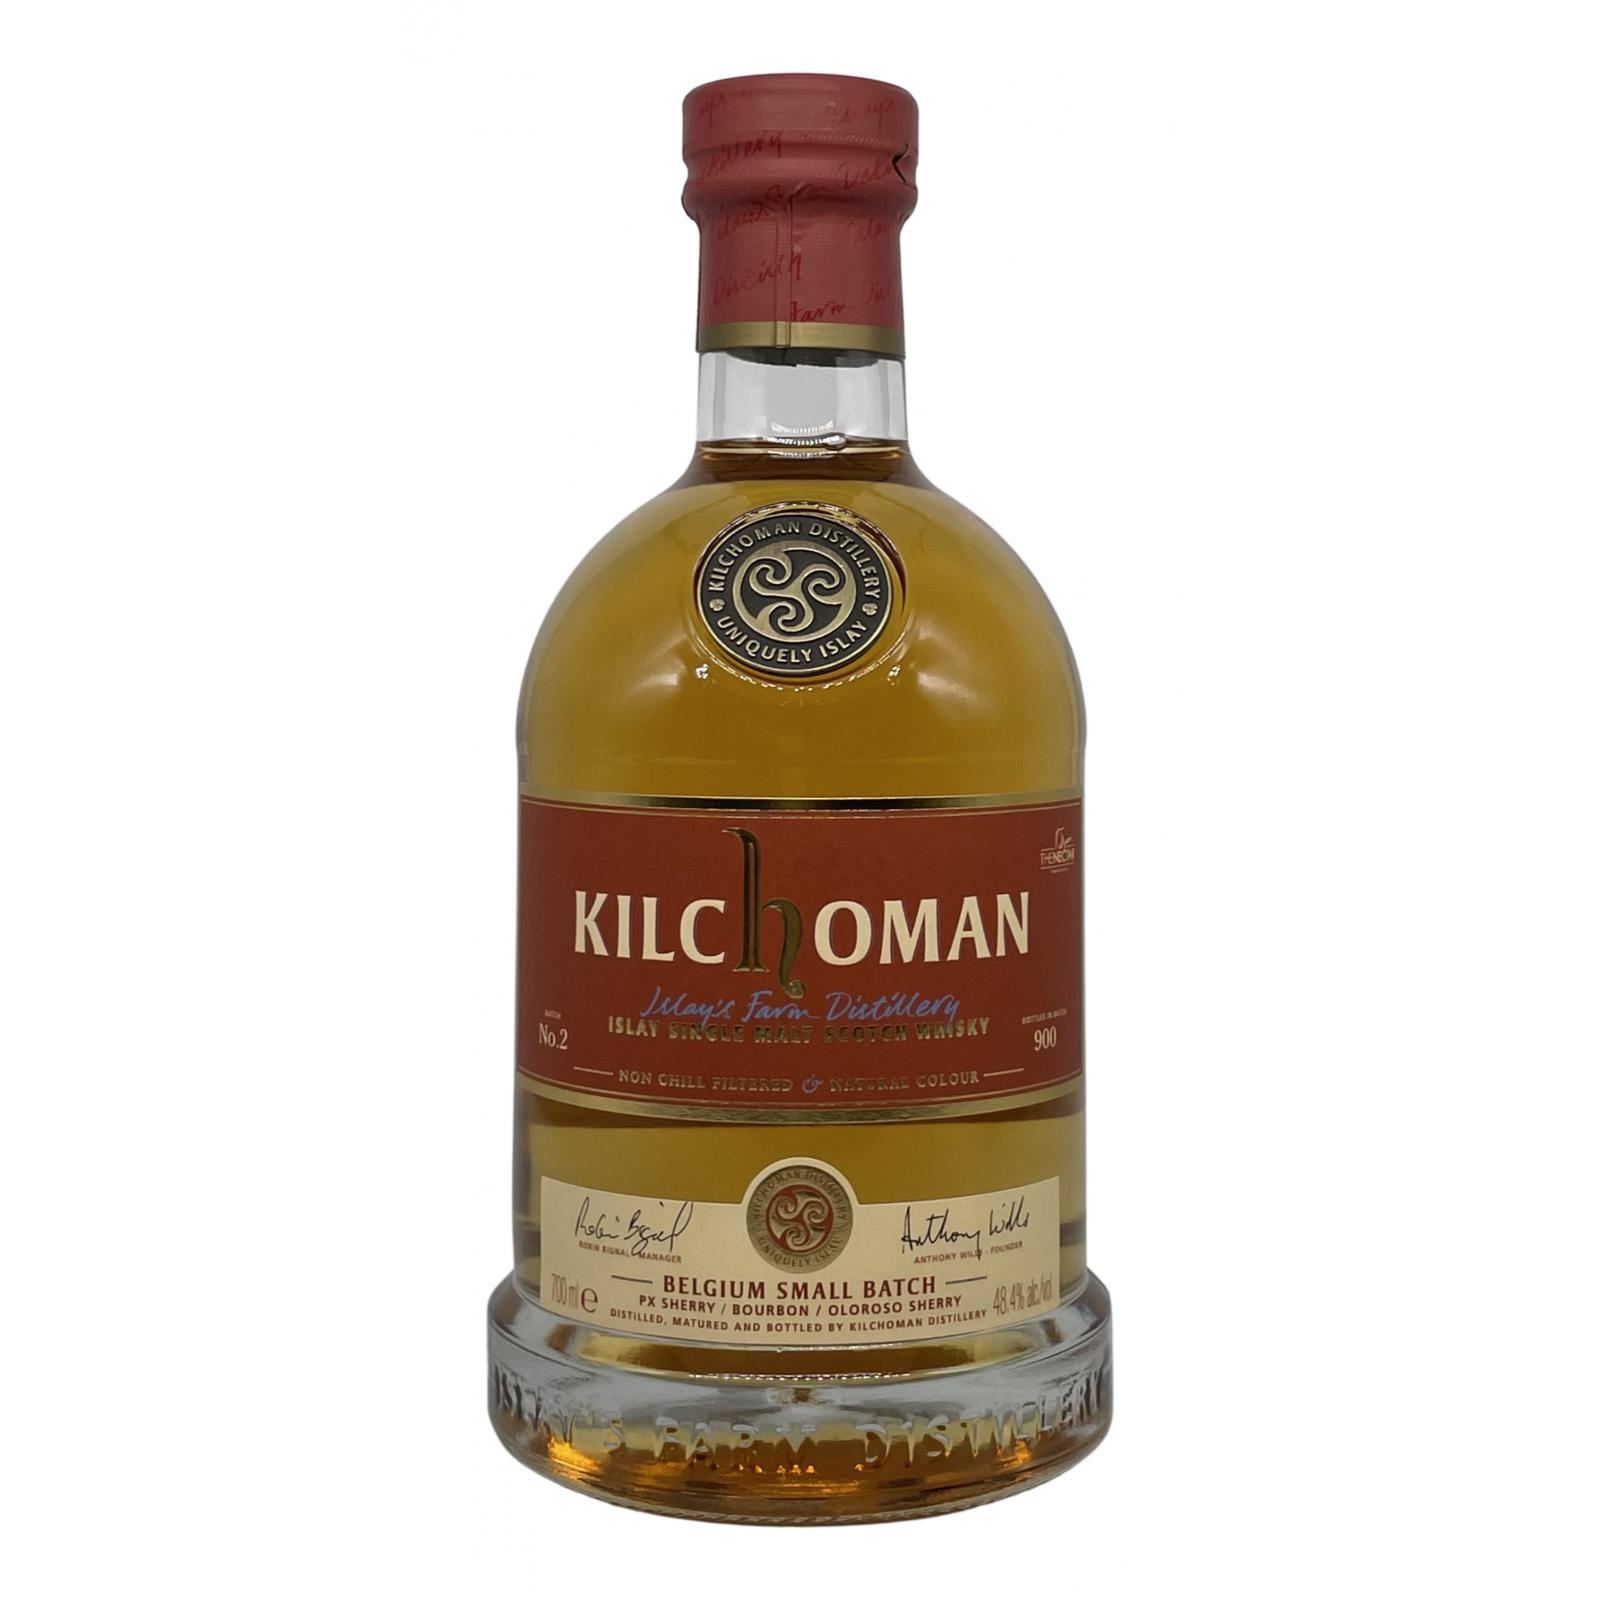 You are currently viewing Kilchoman – Small Batch for Belgium #2